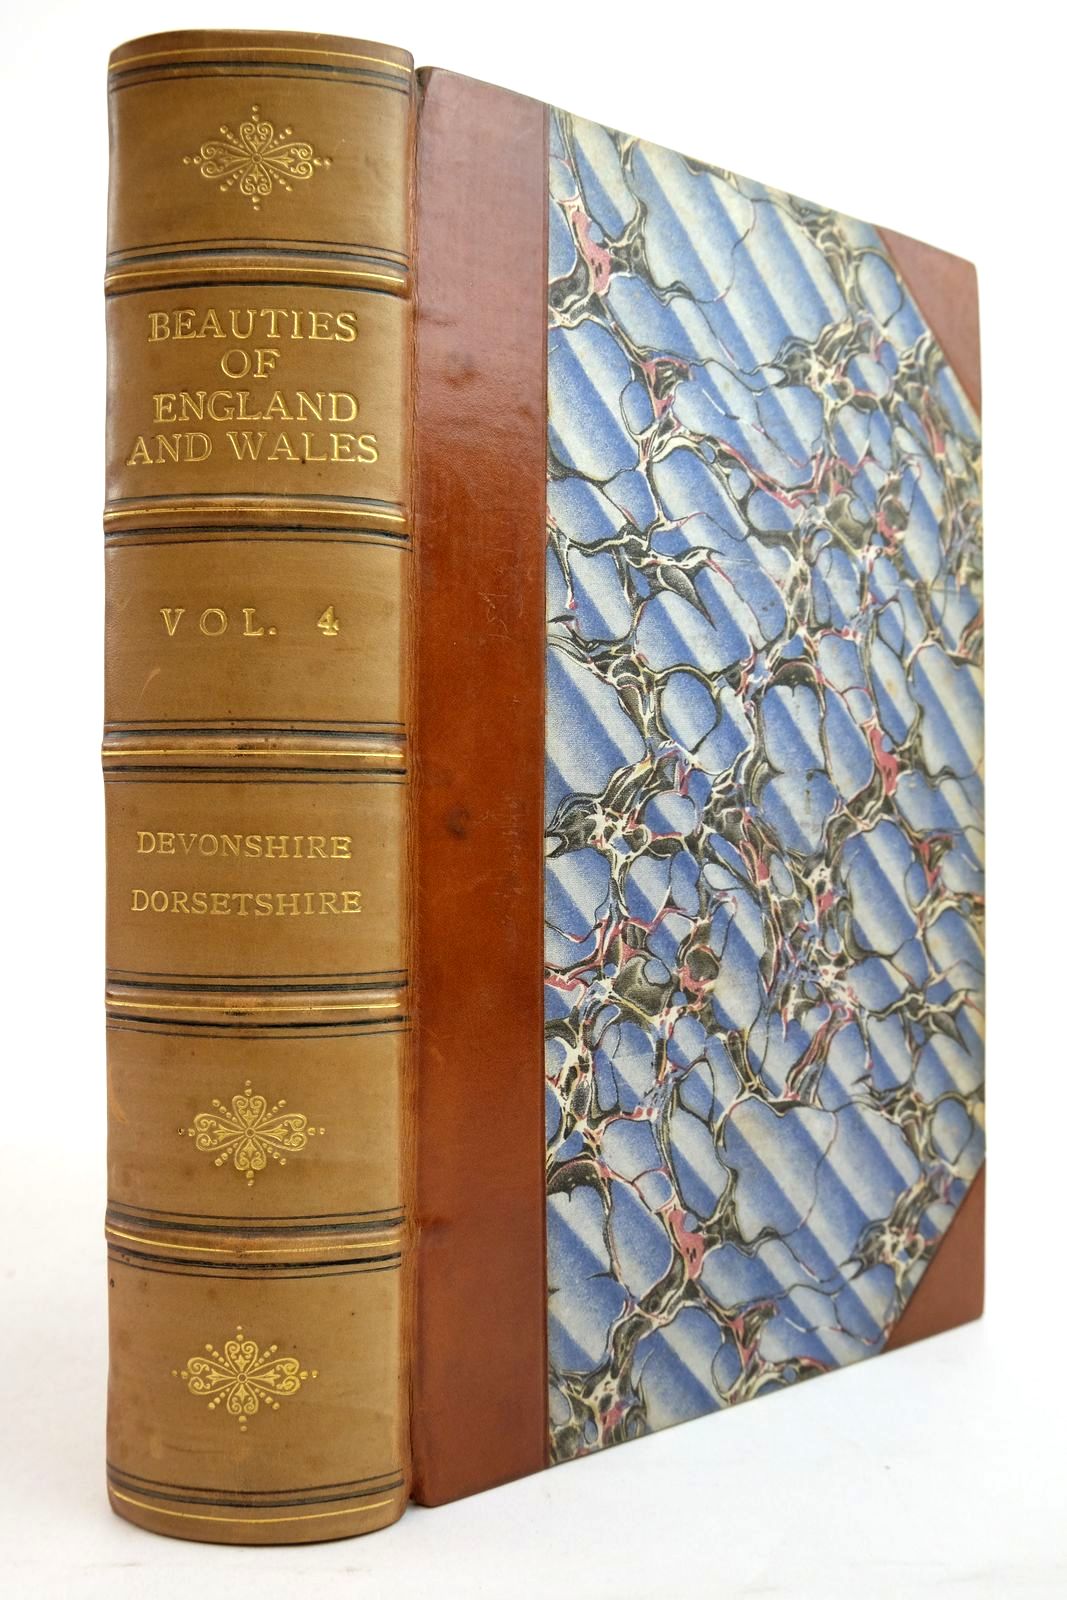 Photo of THE BEAUTIES OF ENGLAND AND WALES VOL IV written by Britton, John
Brayley, Edward Wedlake published by Vernor & Hood (STOCK CODE: 2134499)  for sale by Stella & Rose's Books